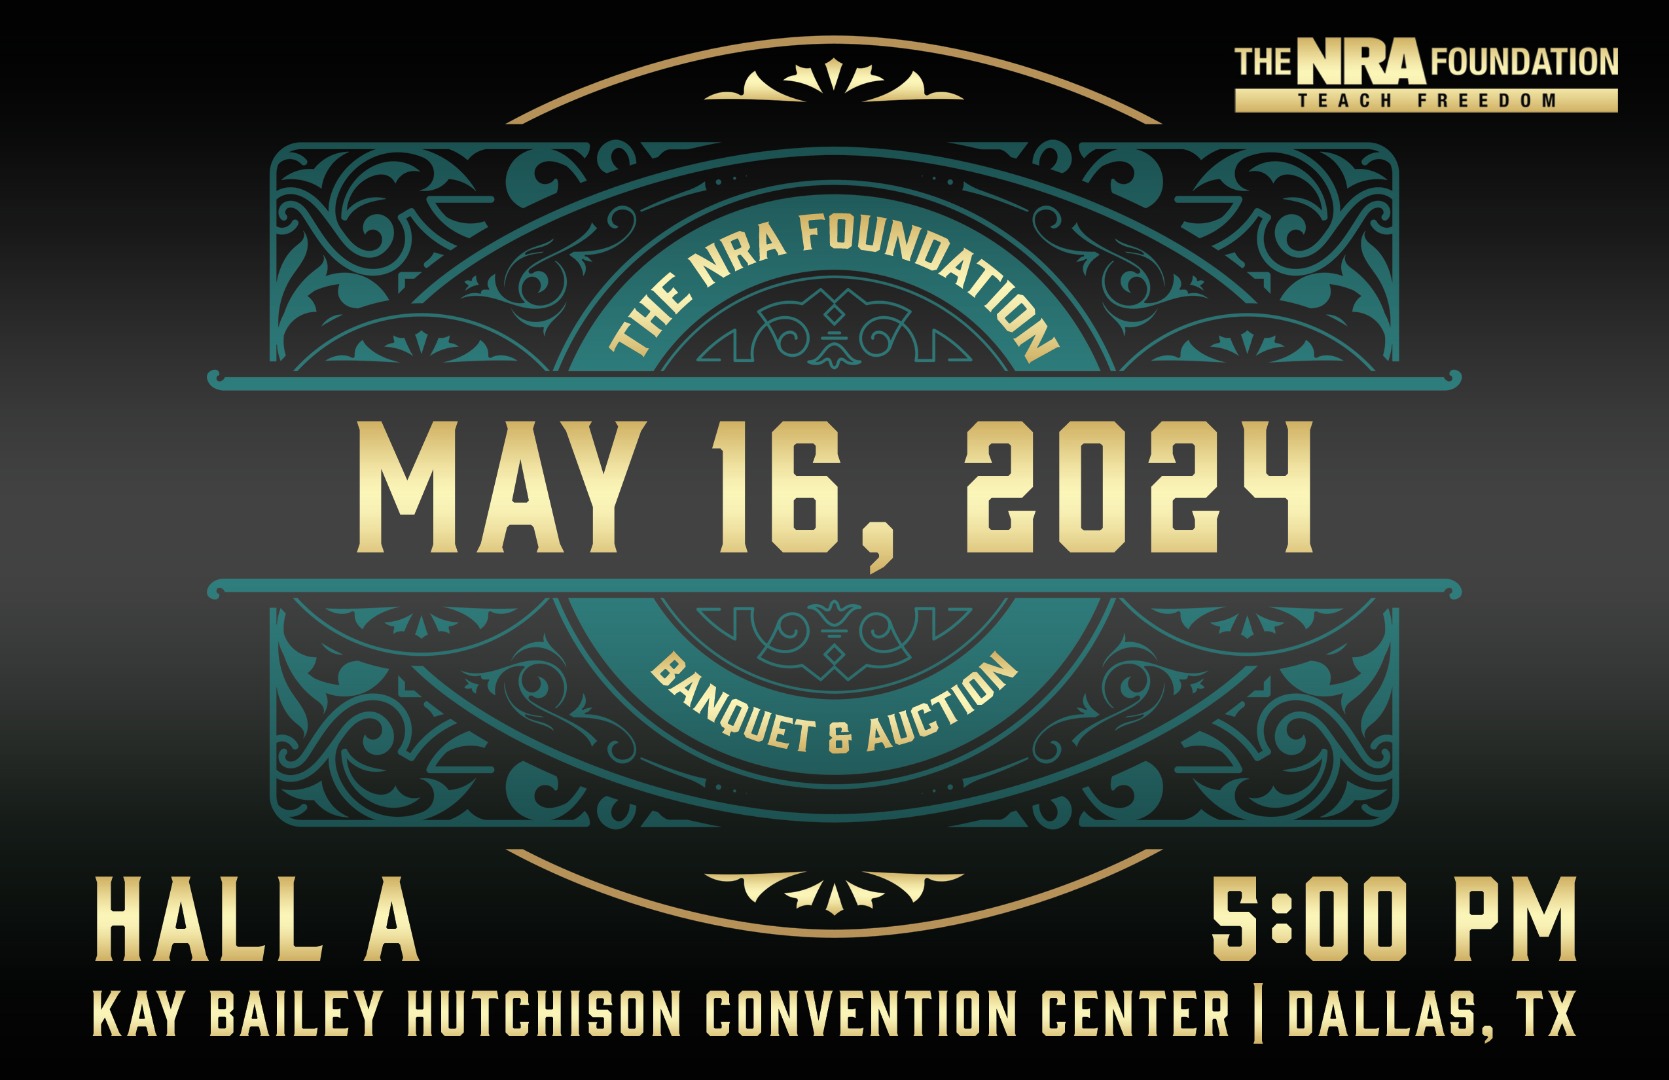 NRA Foundation Banquet and Auction